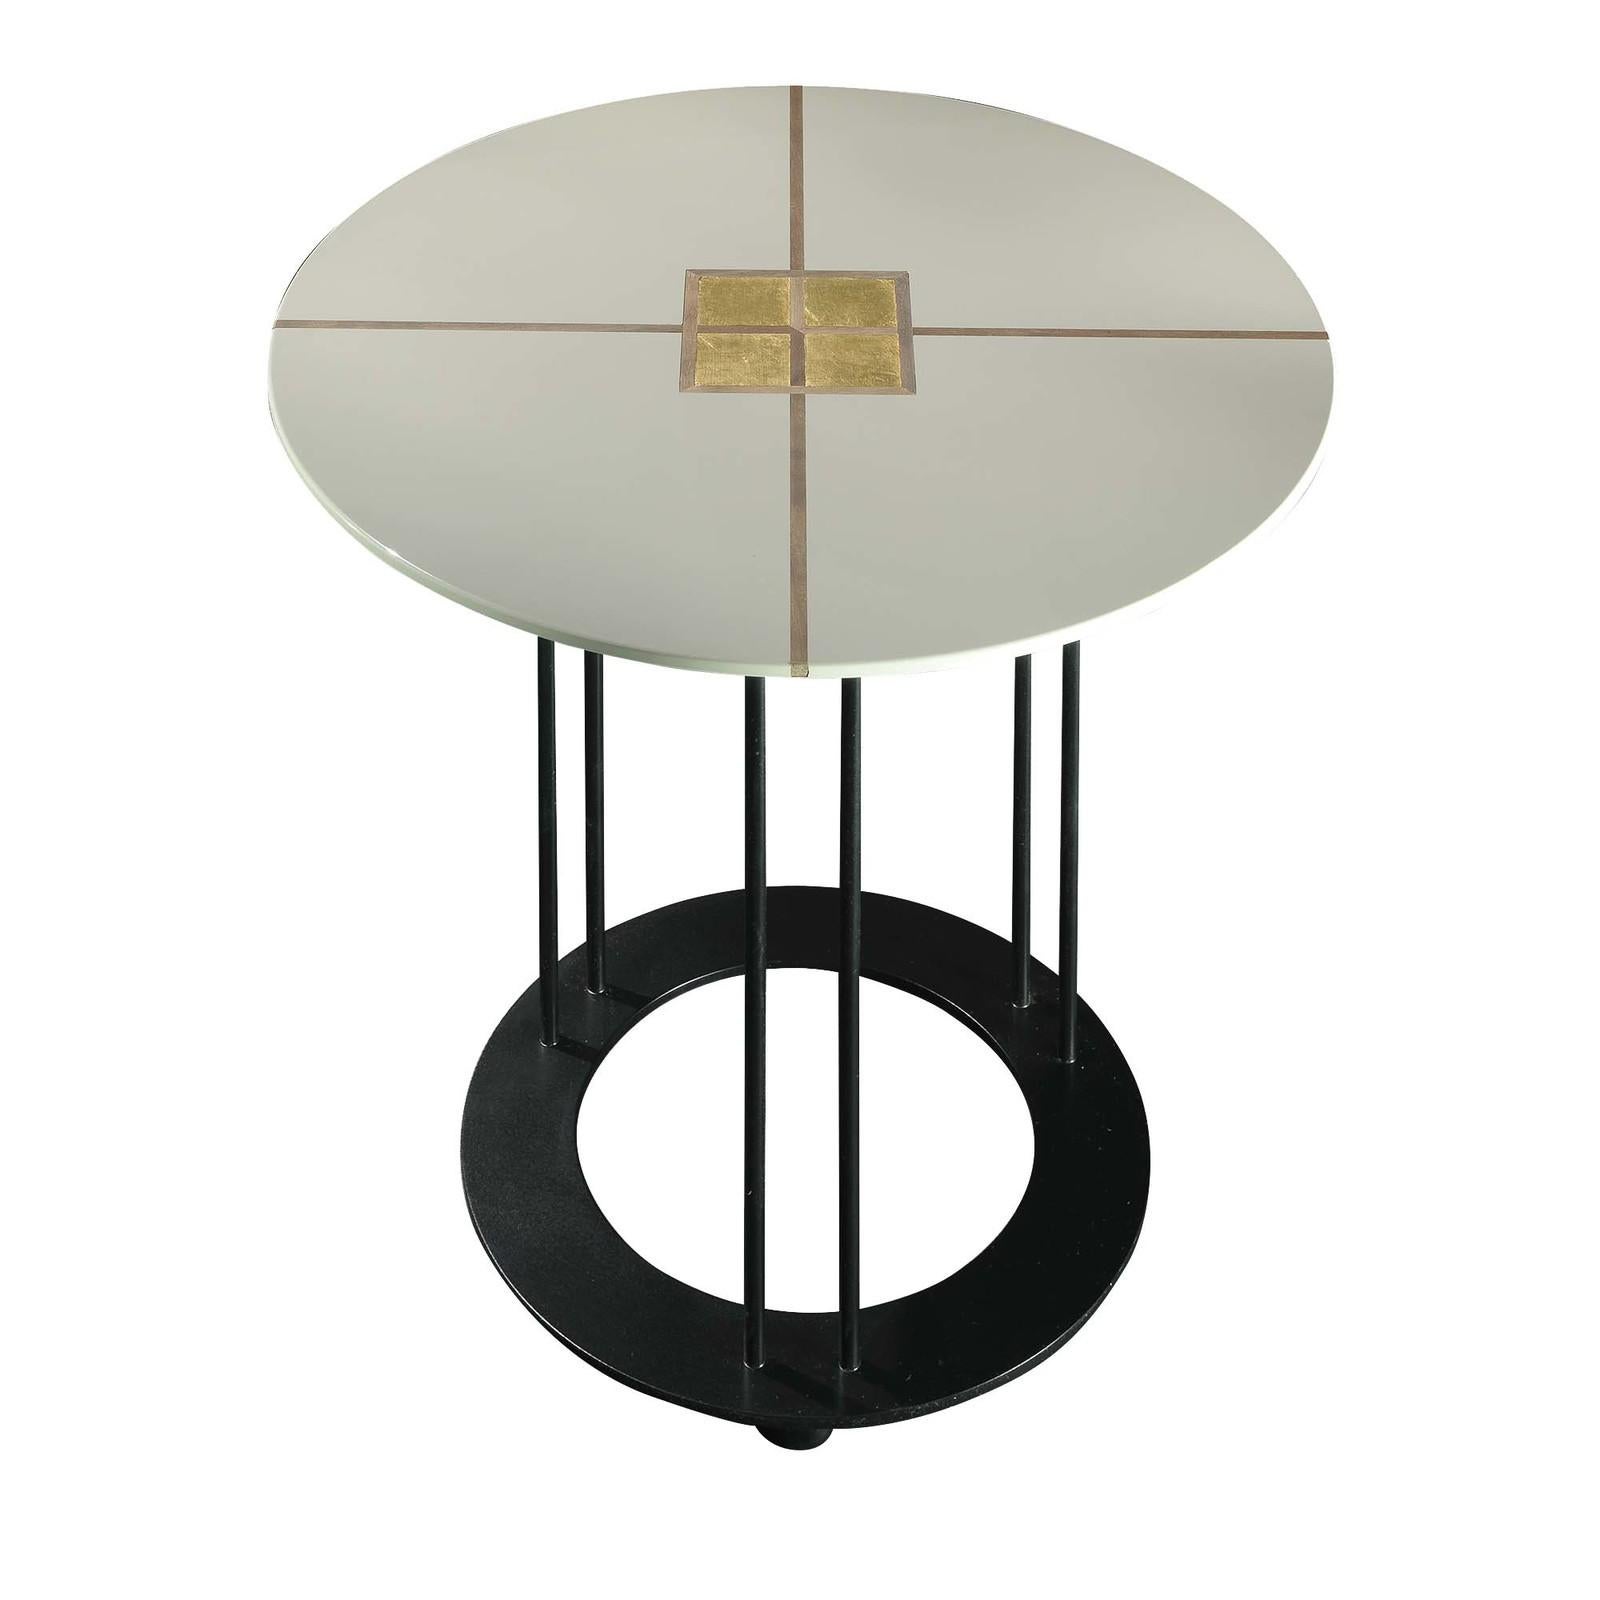 This striking table is defined by a modern profile and will best suit a midcentury or Minimalist interior. The round top features a celadon shiny polyurethane lacquer, which contrasts with the cross gold leaf inlay, the two lines in Canaletto walnut